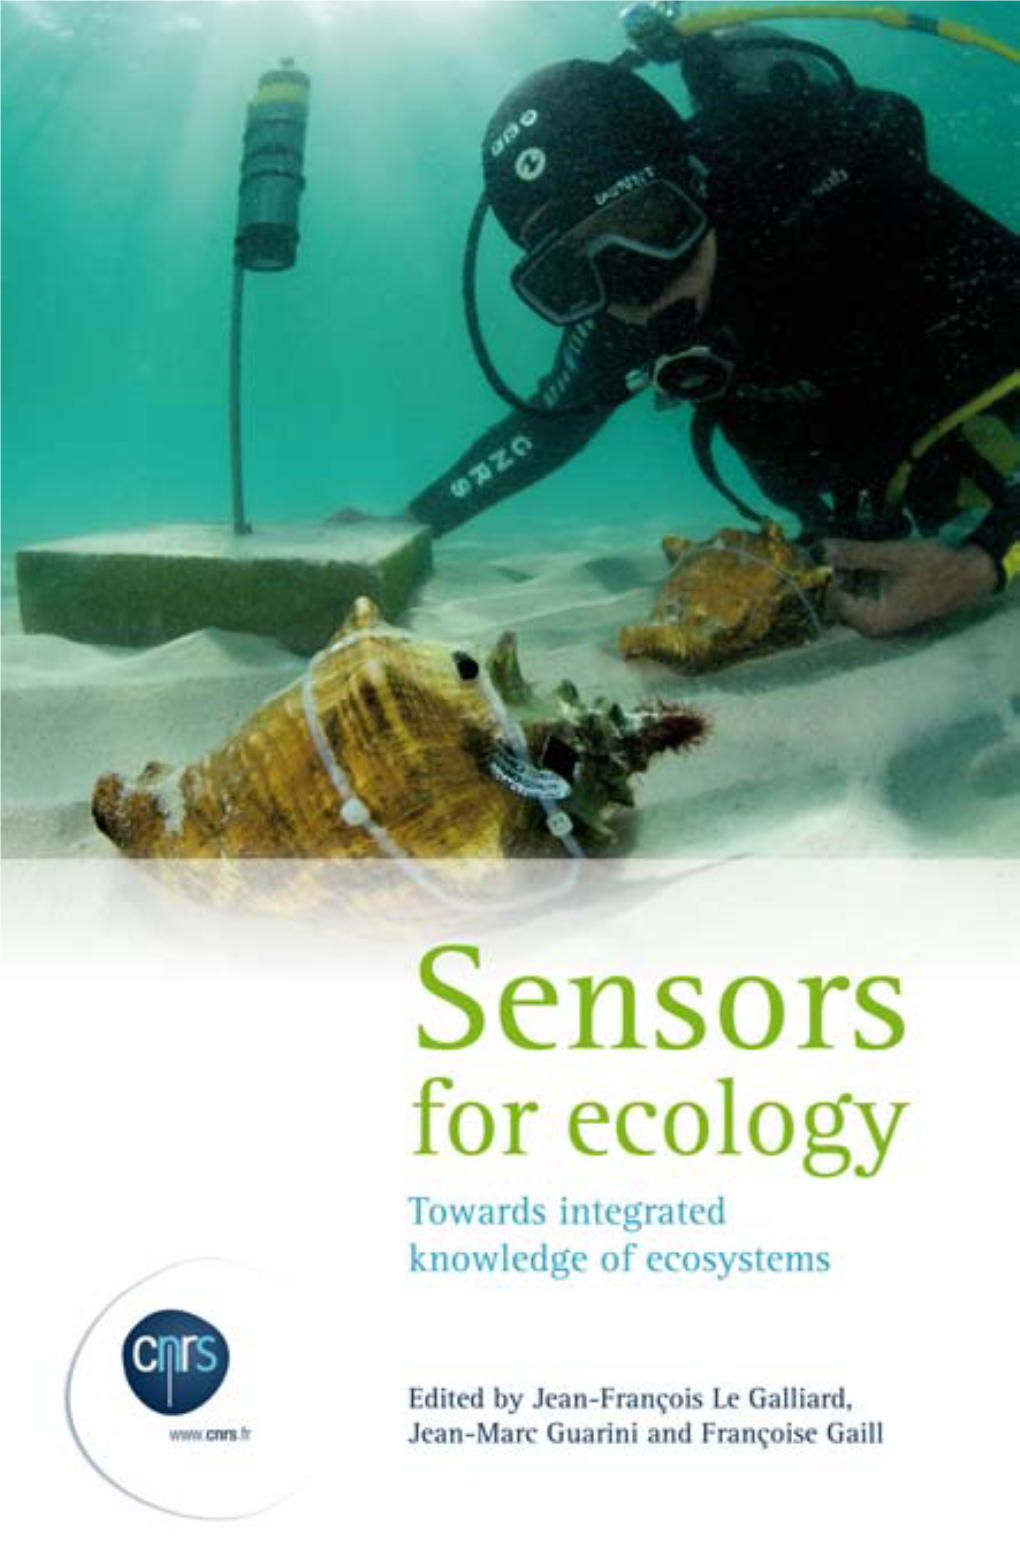 Sensors for Ecology and Makes a Strong Case for Deploying Integrated Sensor Platforms